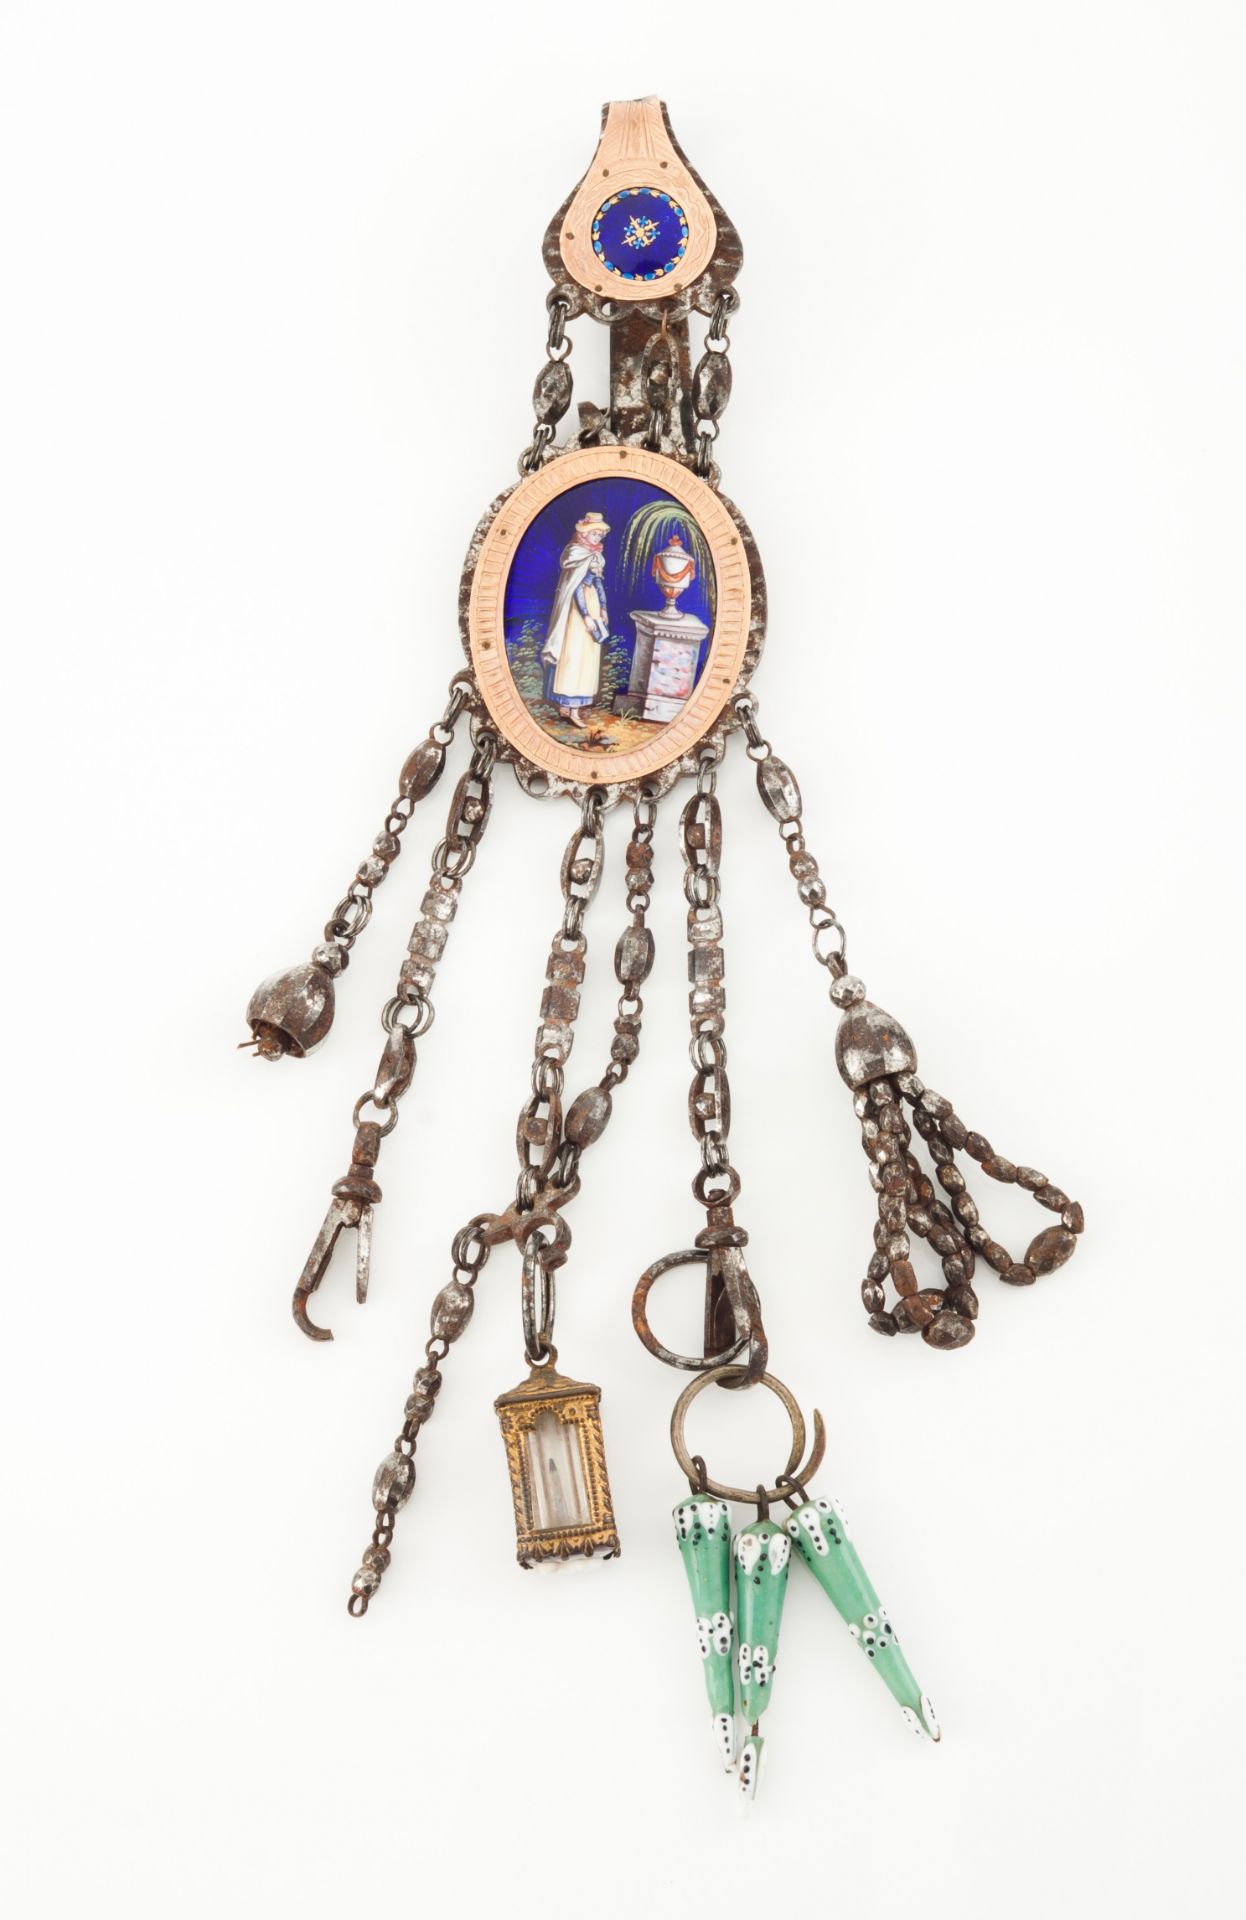 A chatelaineMetalEnamelled medallion depicting a female figure with urn and willowChains with